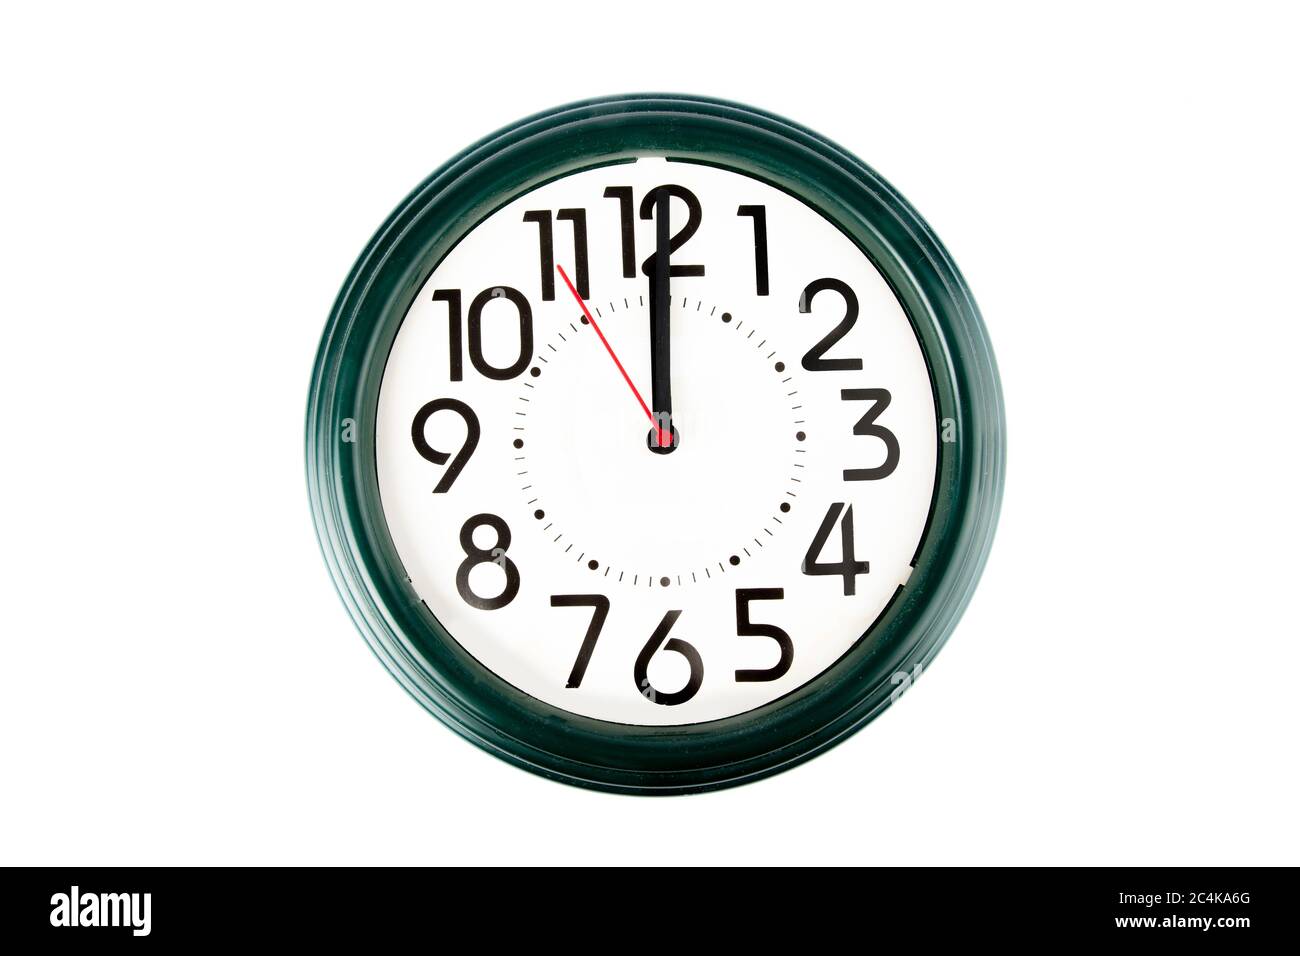 high noon or midnight at twelve o'clock on a clock with large numbers Stock Photo